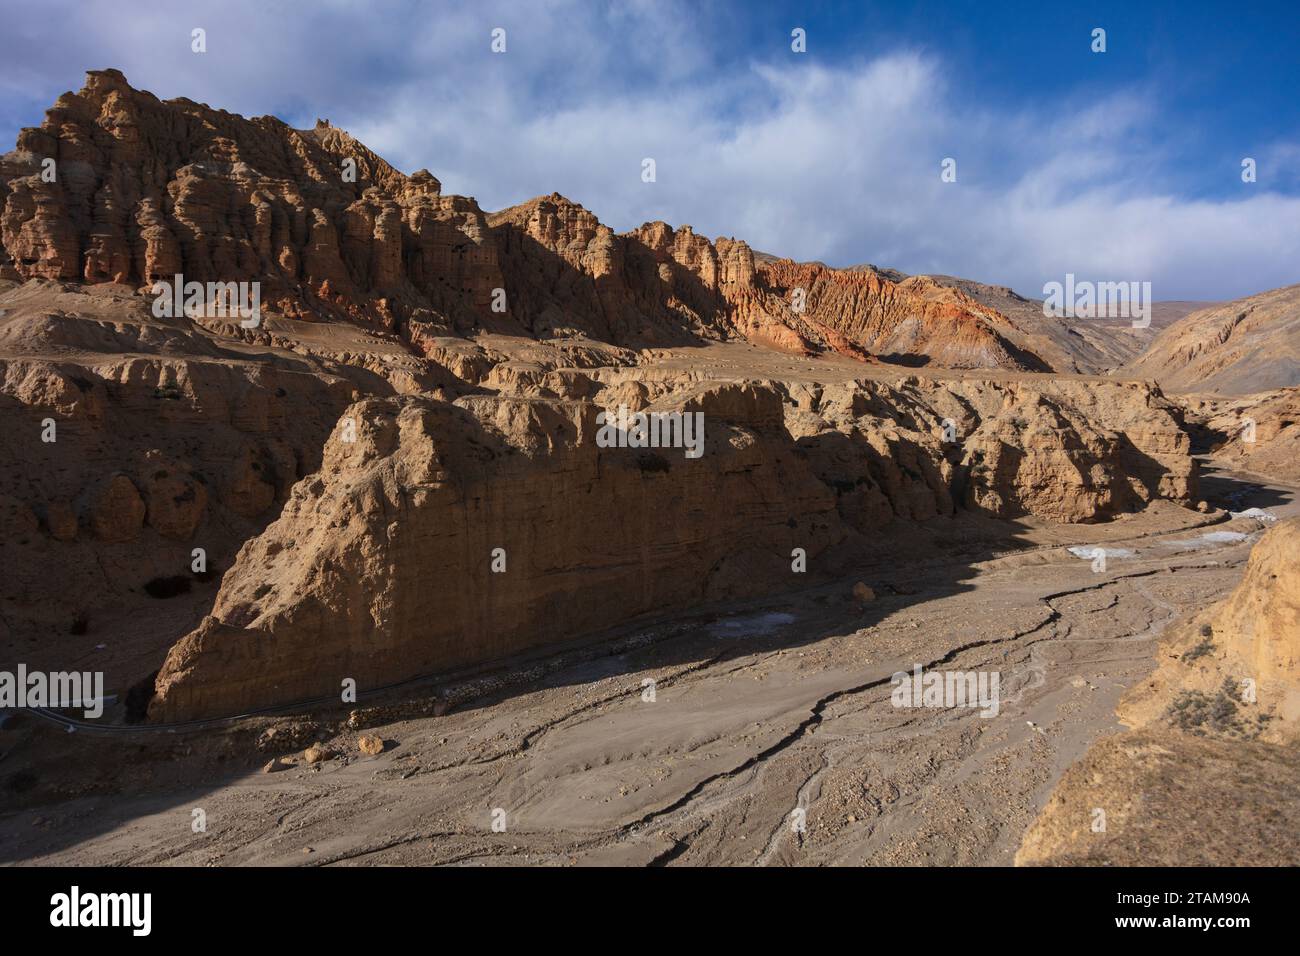 The rugged terrain of upper Mustang, Nepal Stock Photo